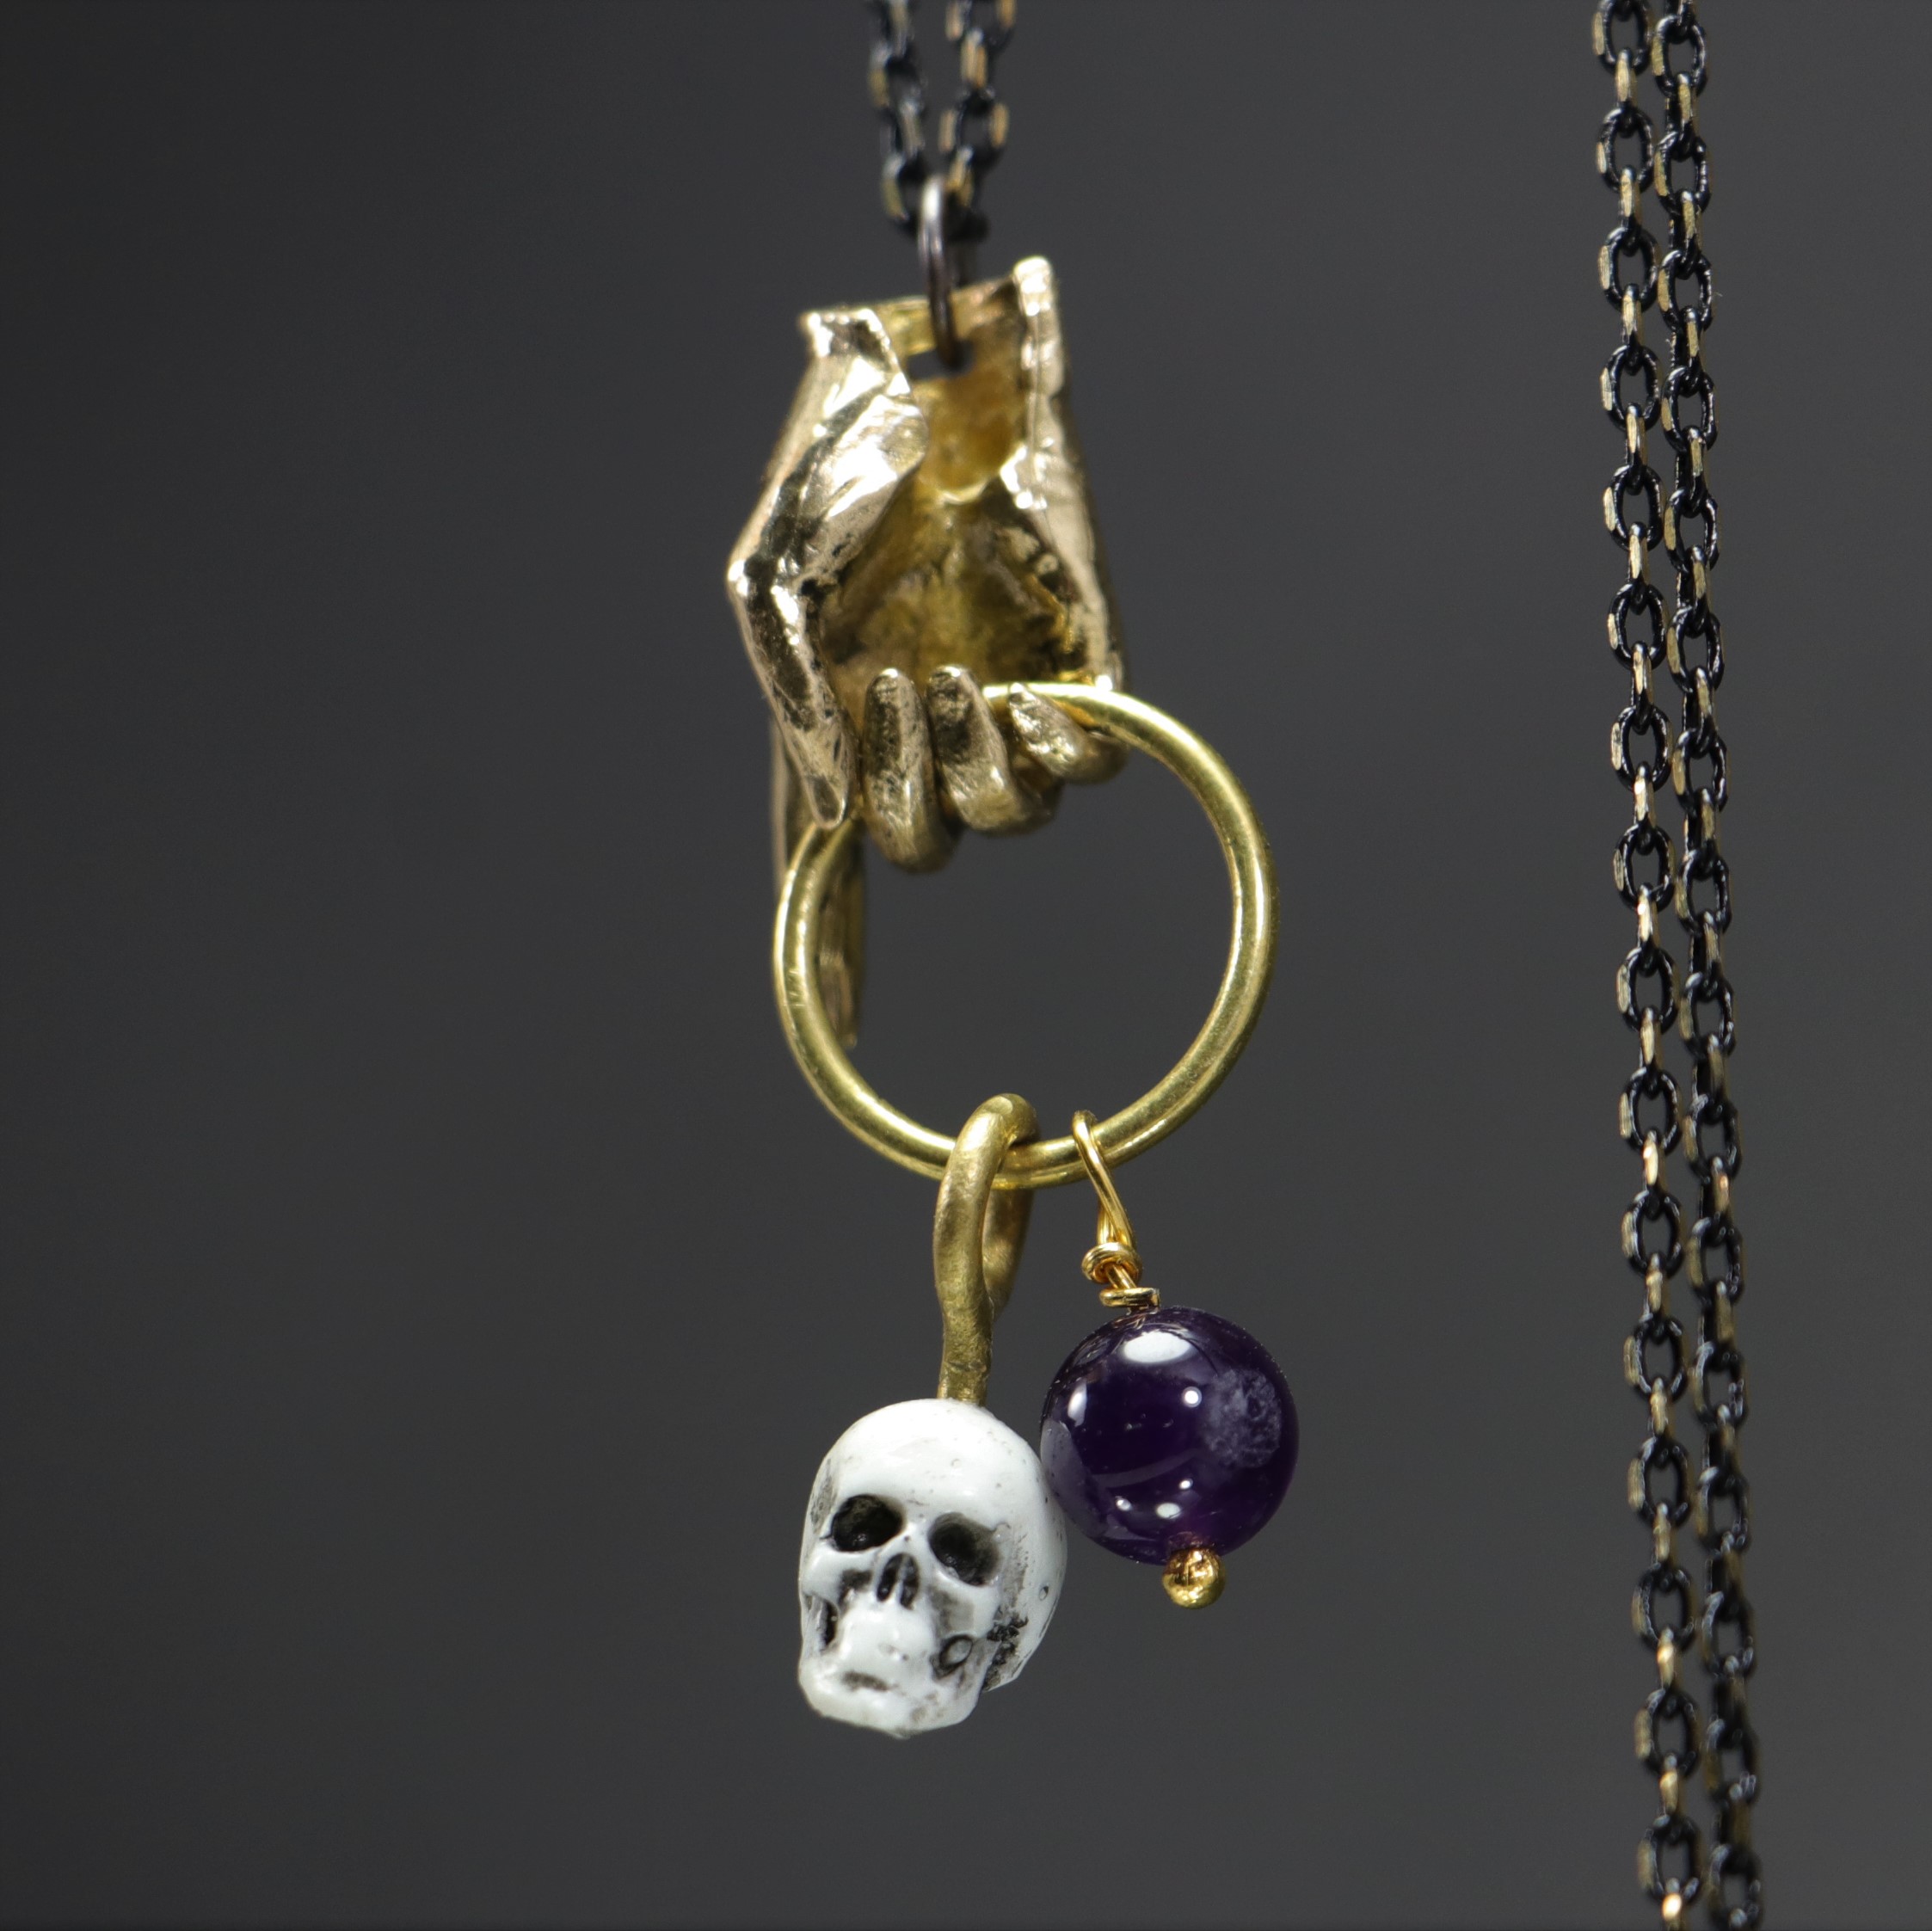 Hand and Skull Amethyst Stone Necklace